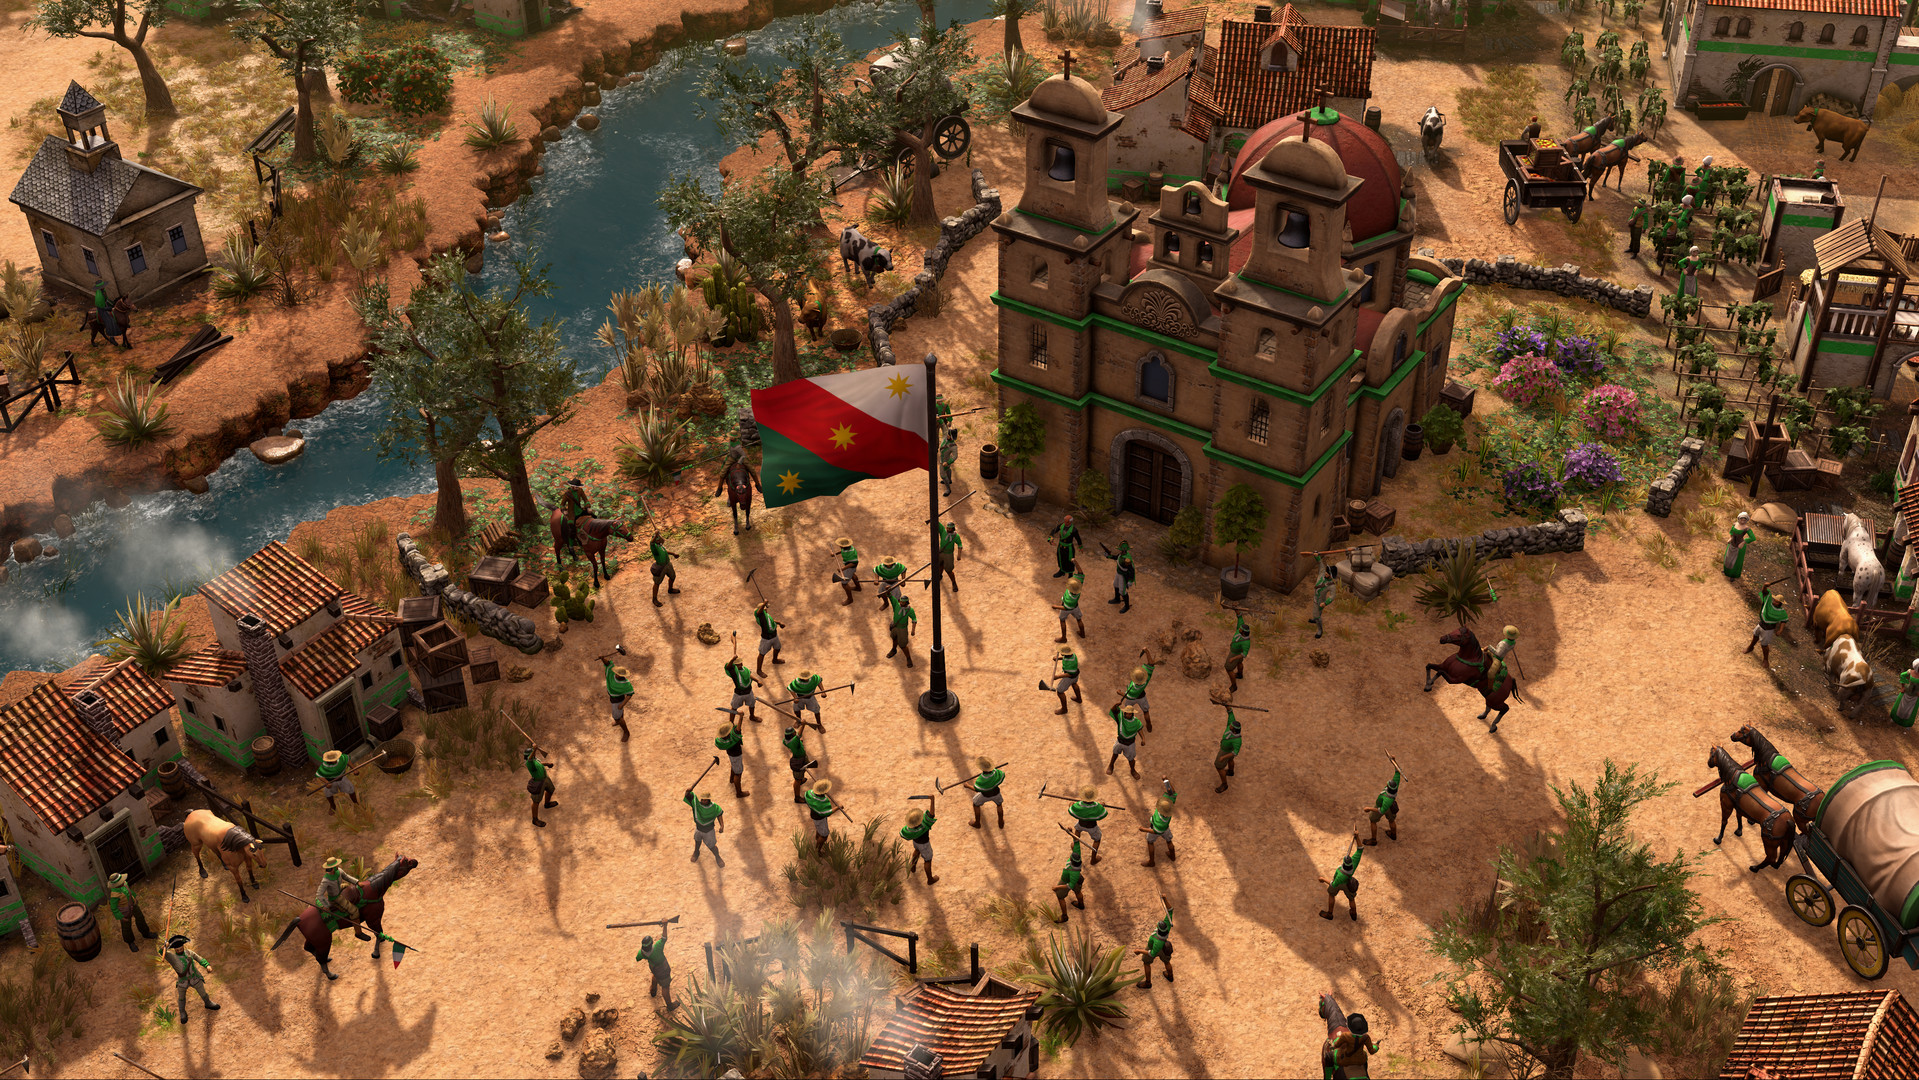 Age of Empires III: Definitive Edition - Mexico Civilization Featured Screenshot #1